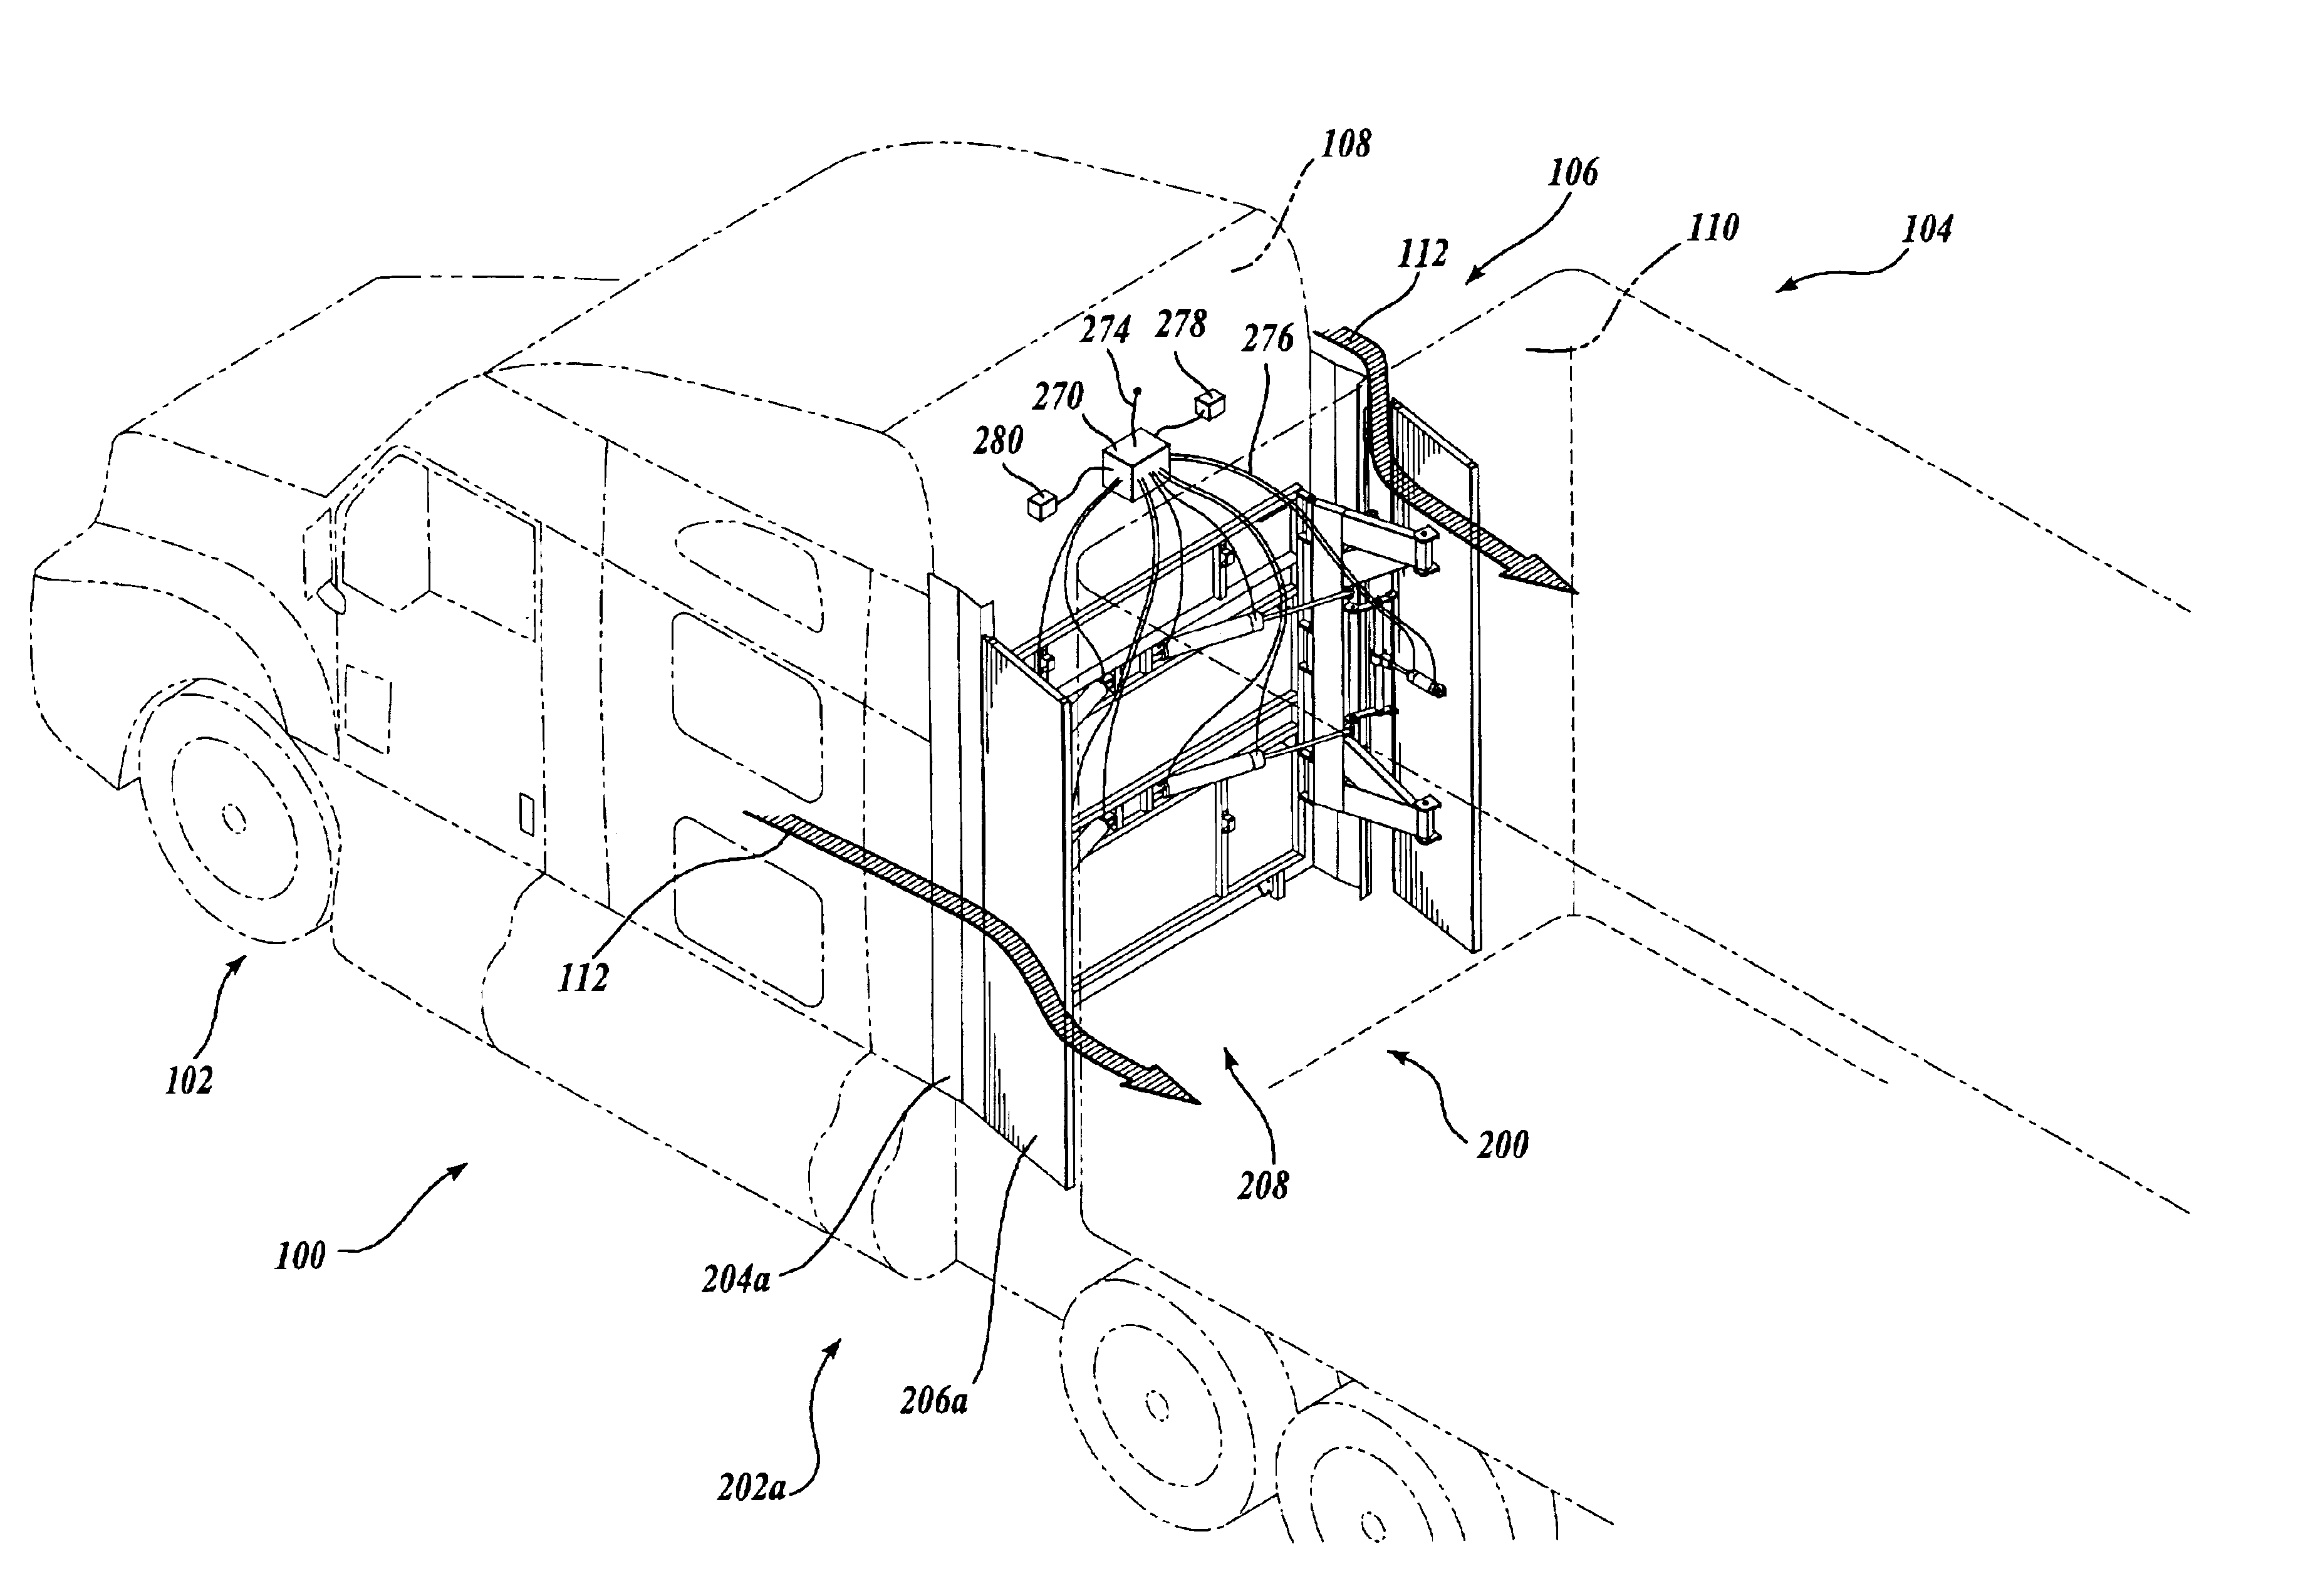 Cab extender assembly method and apparatus